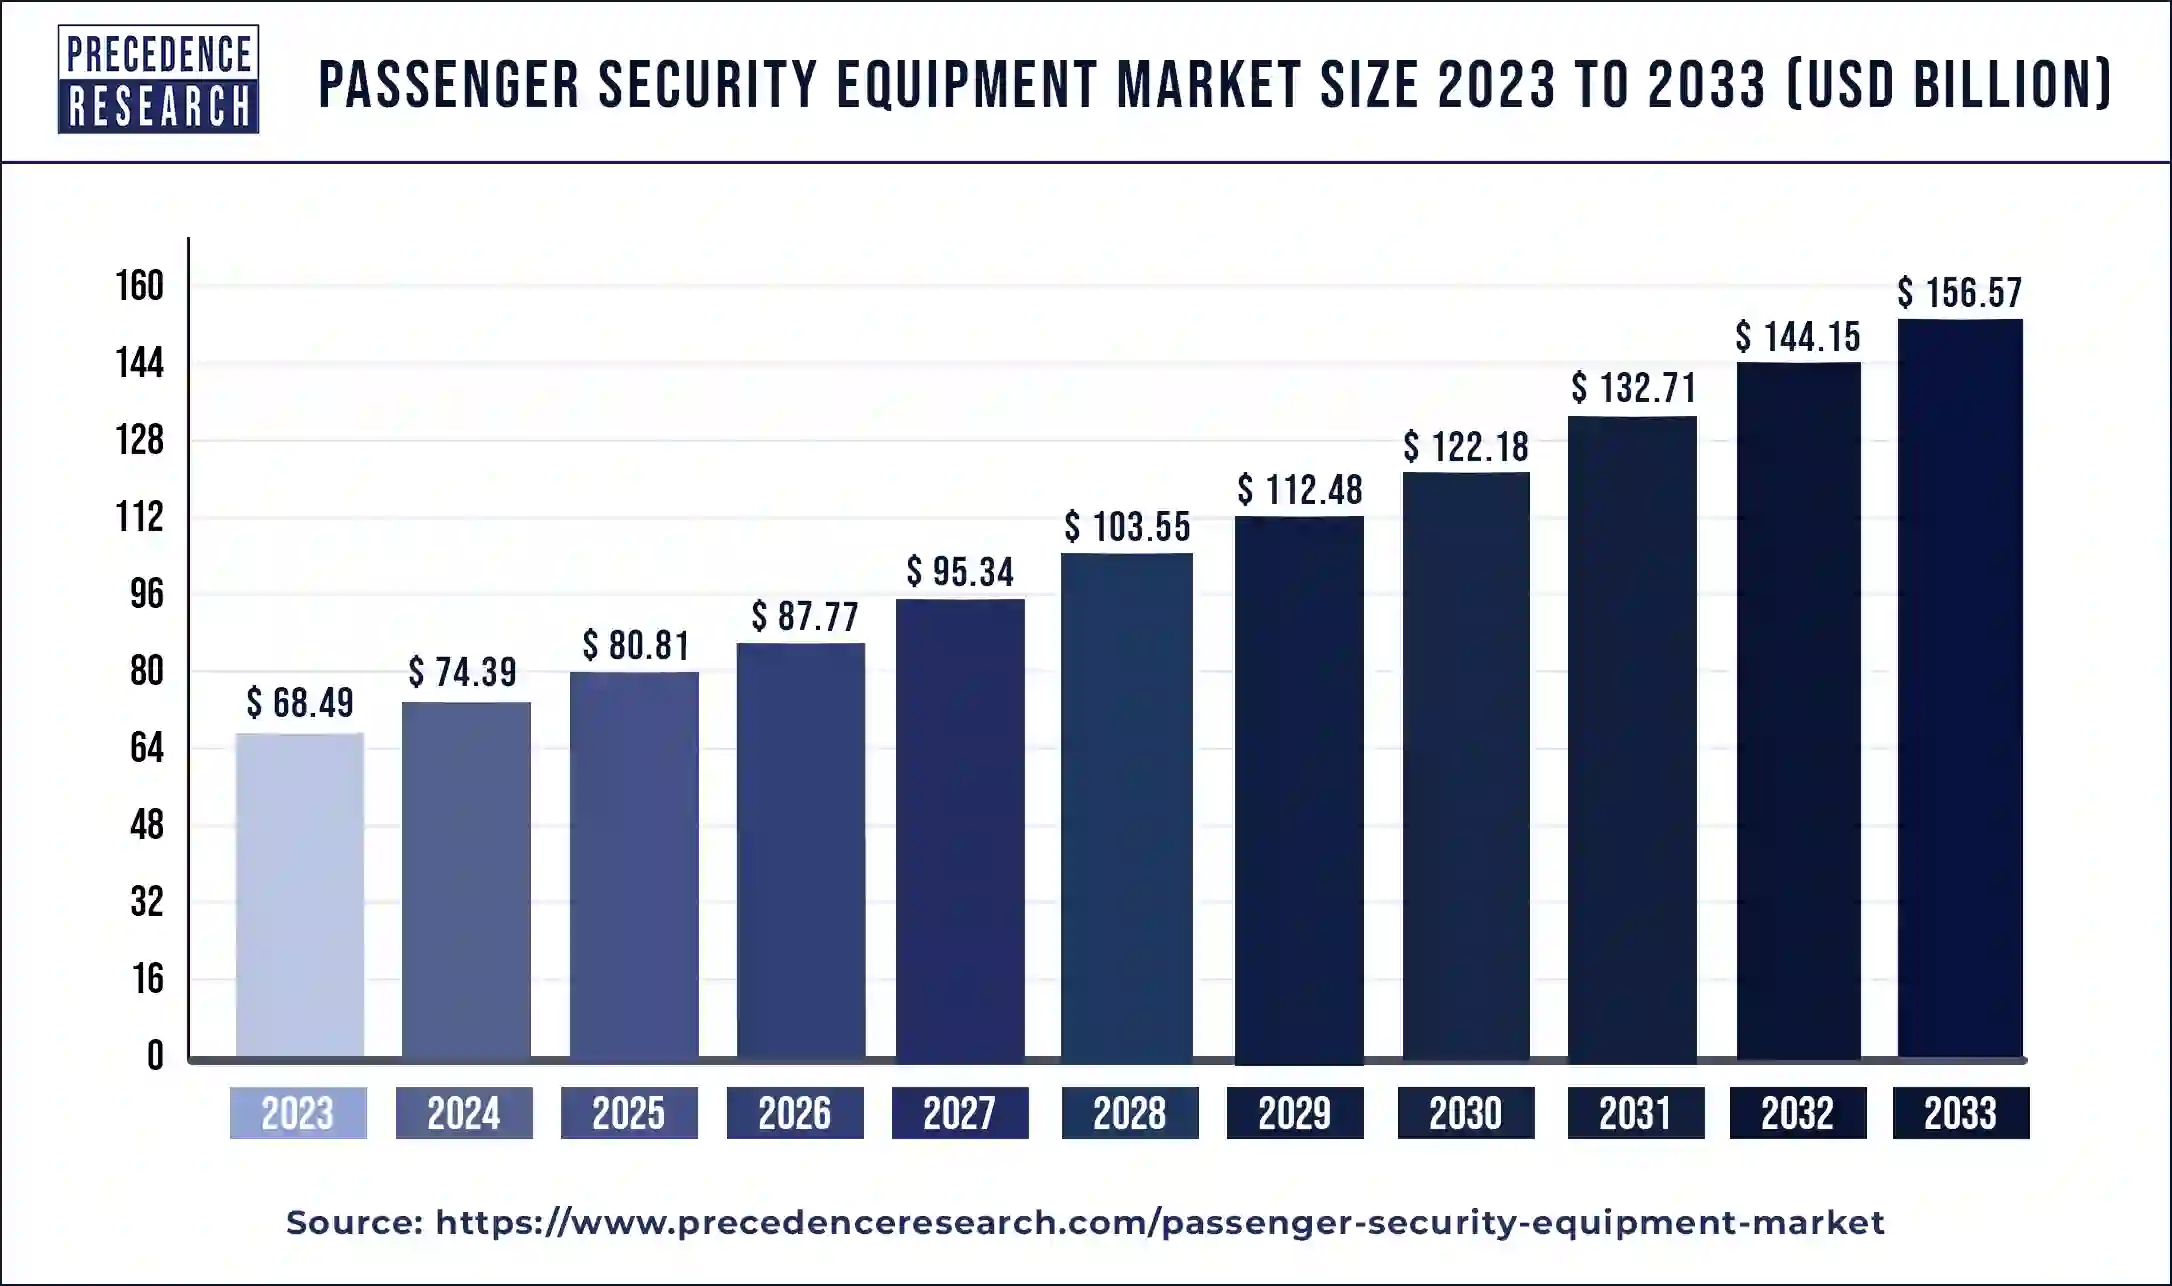 Passenger Security Equipment Market Size 2023 to 2033